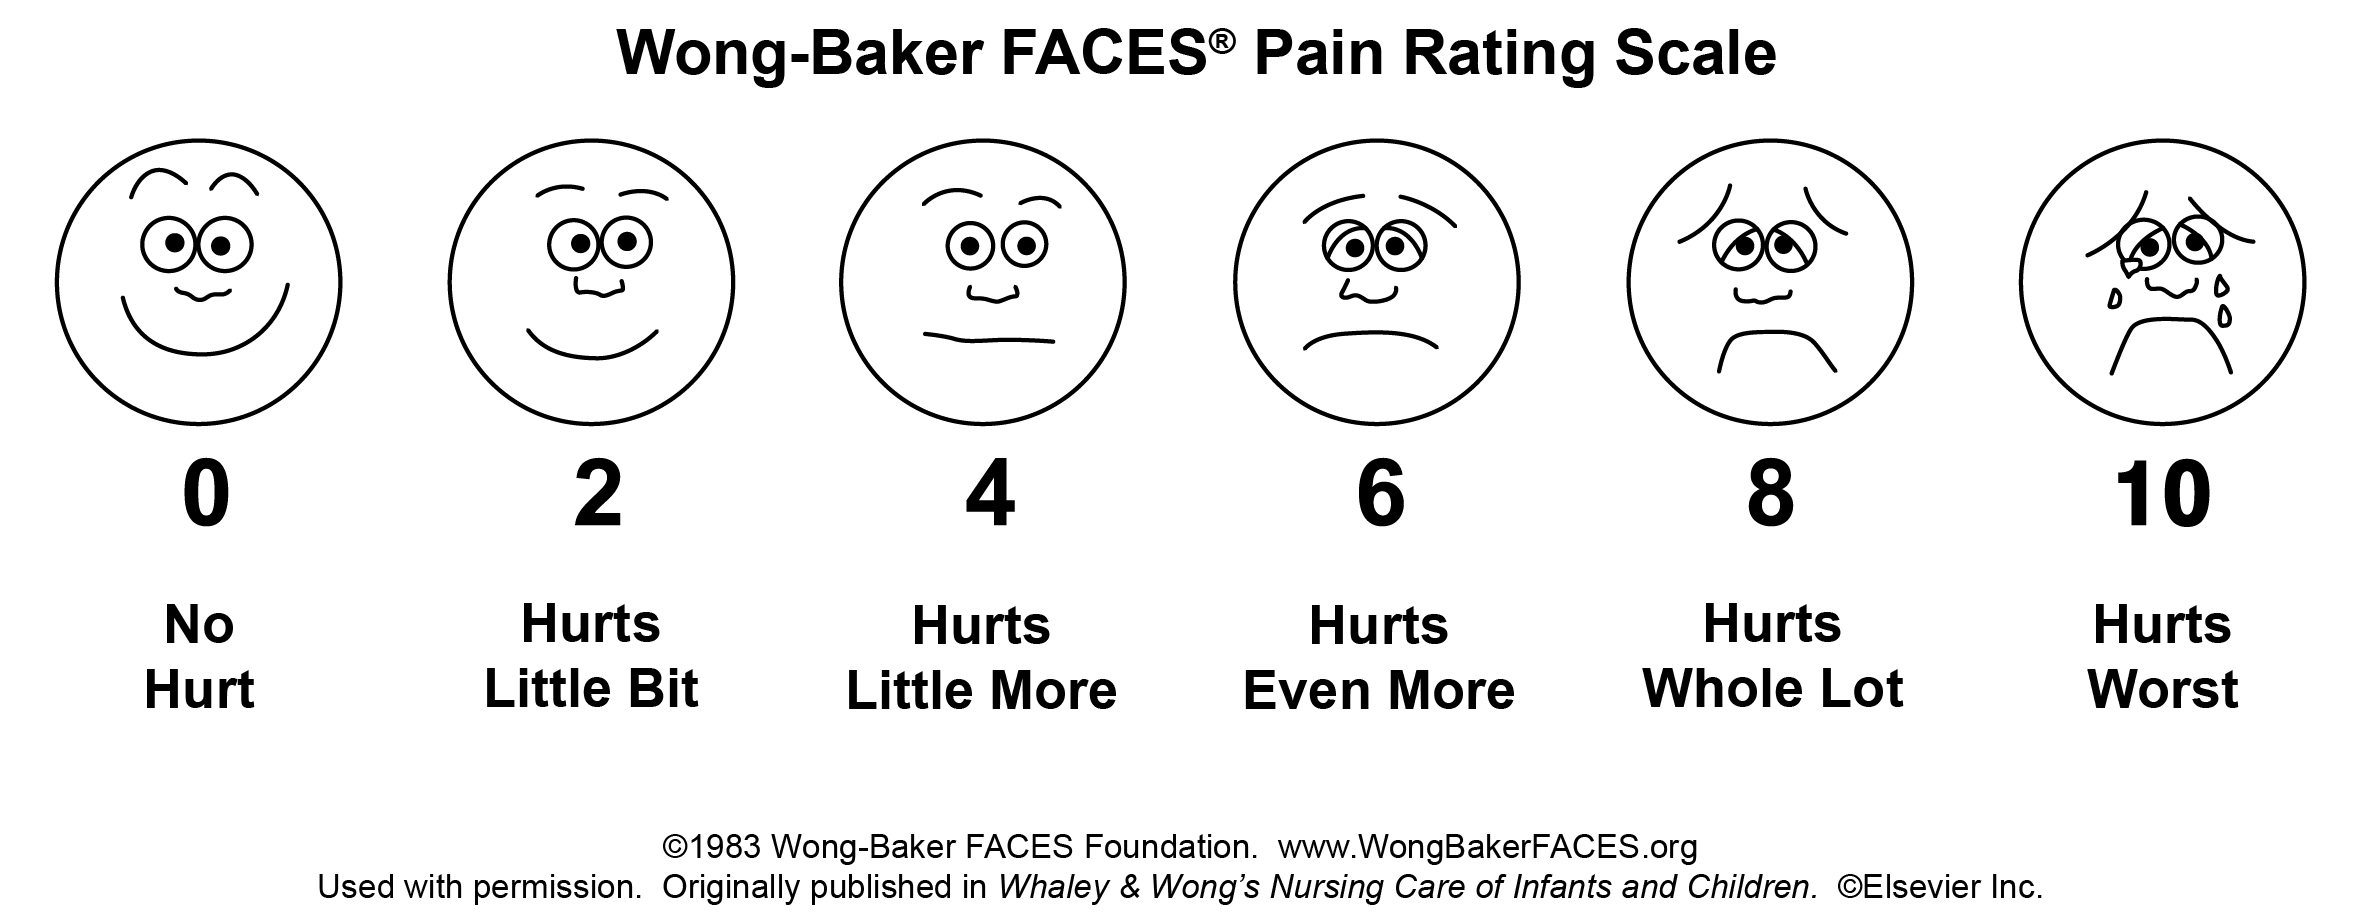 Image of Wong-Baker FACES pain rating scale